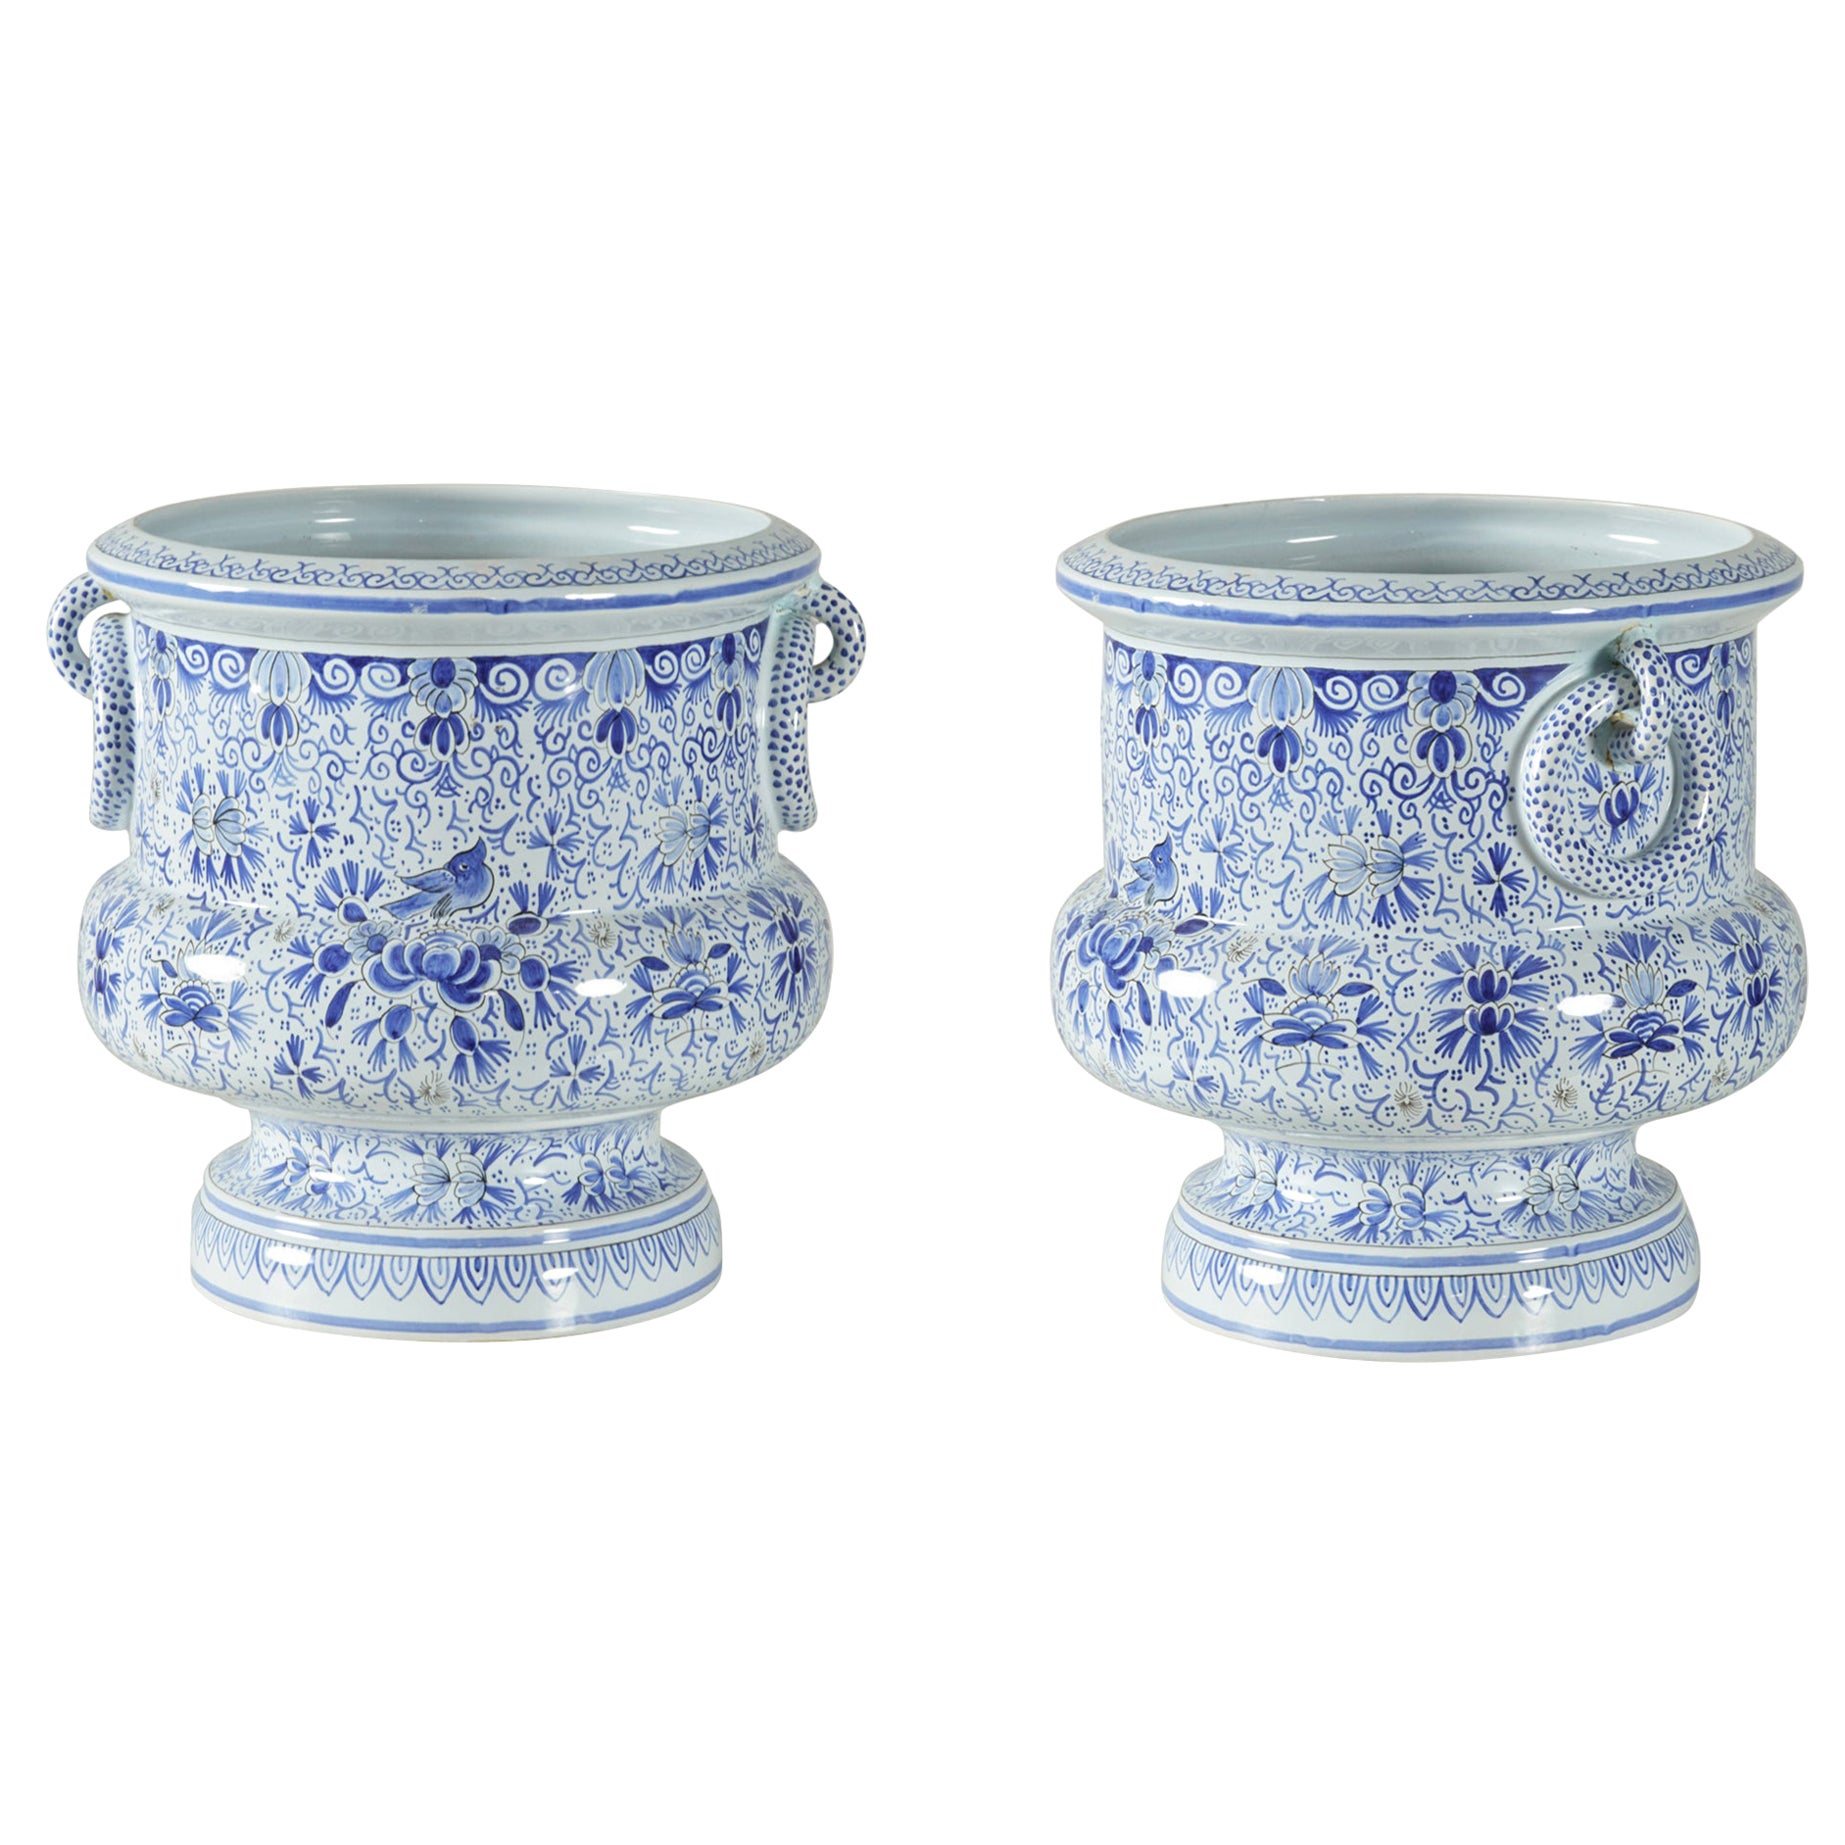 Tiffany & Co. French Mid-Century Blue and White Floral Porcelain Cachepots /Urns